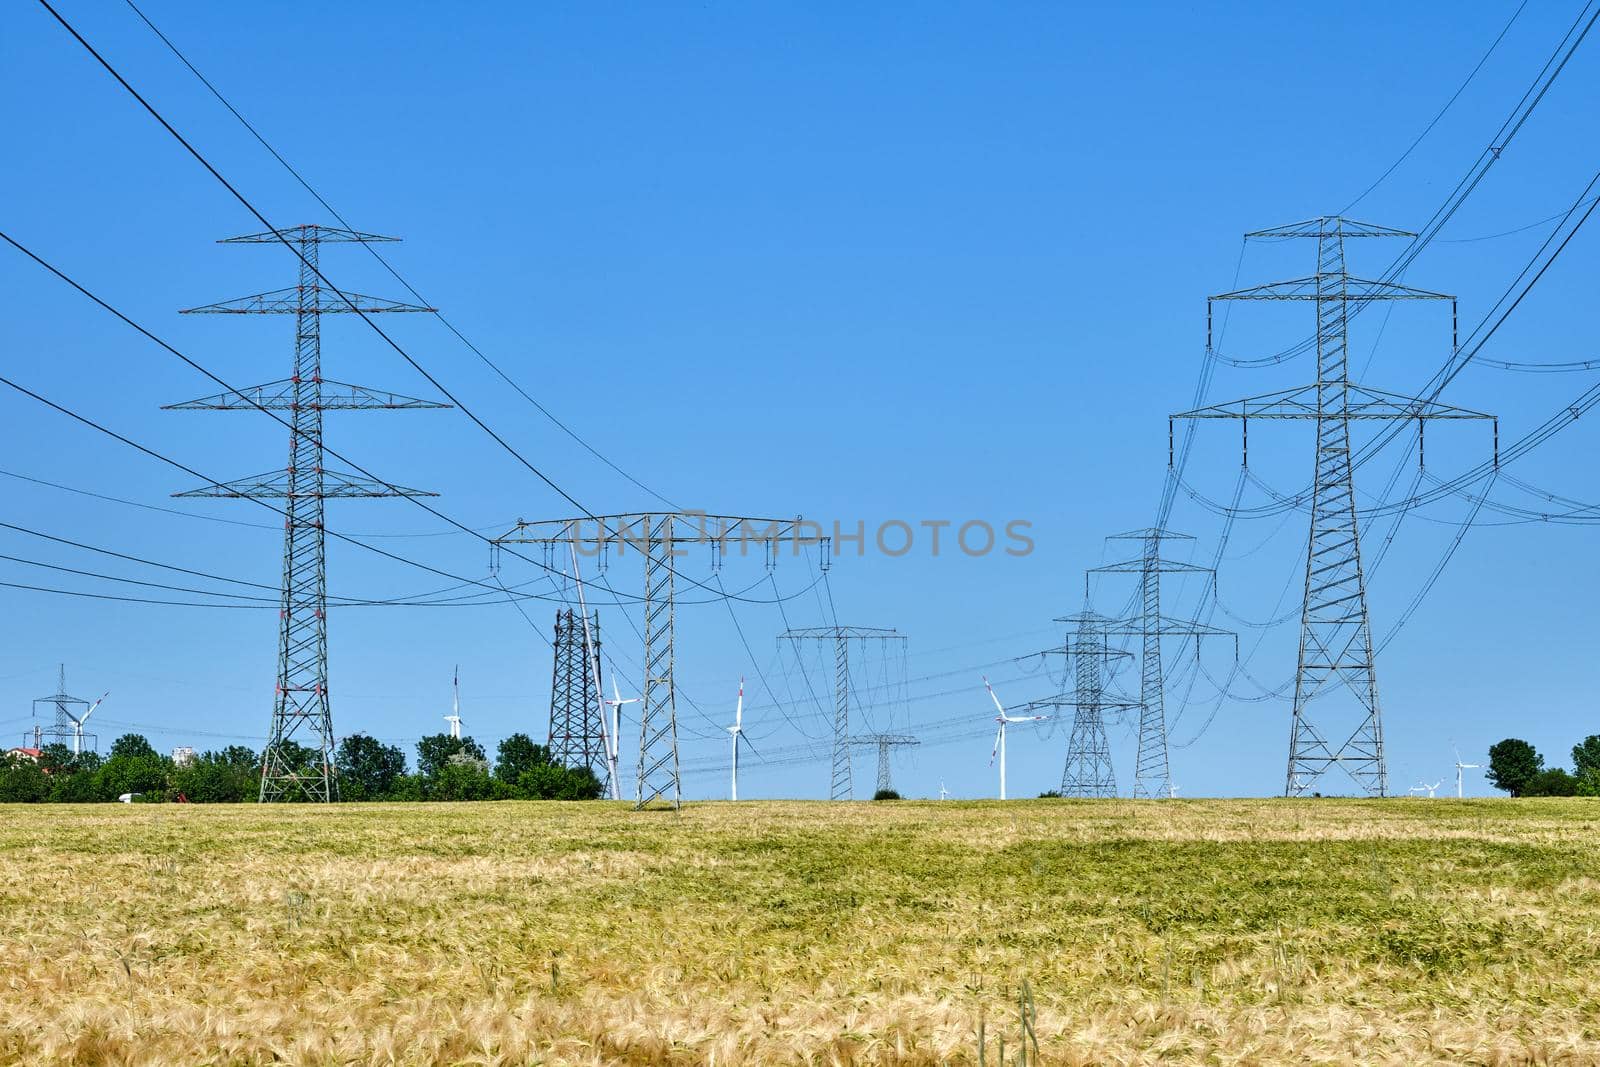 Electricity pylons and power lines with wind turbines by elxeneize